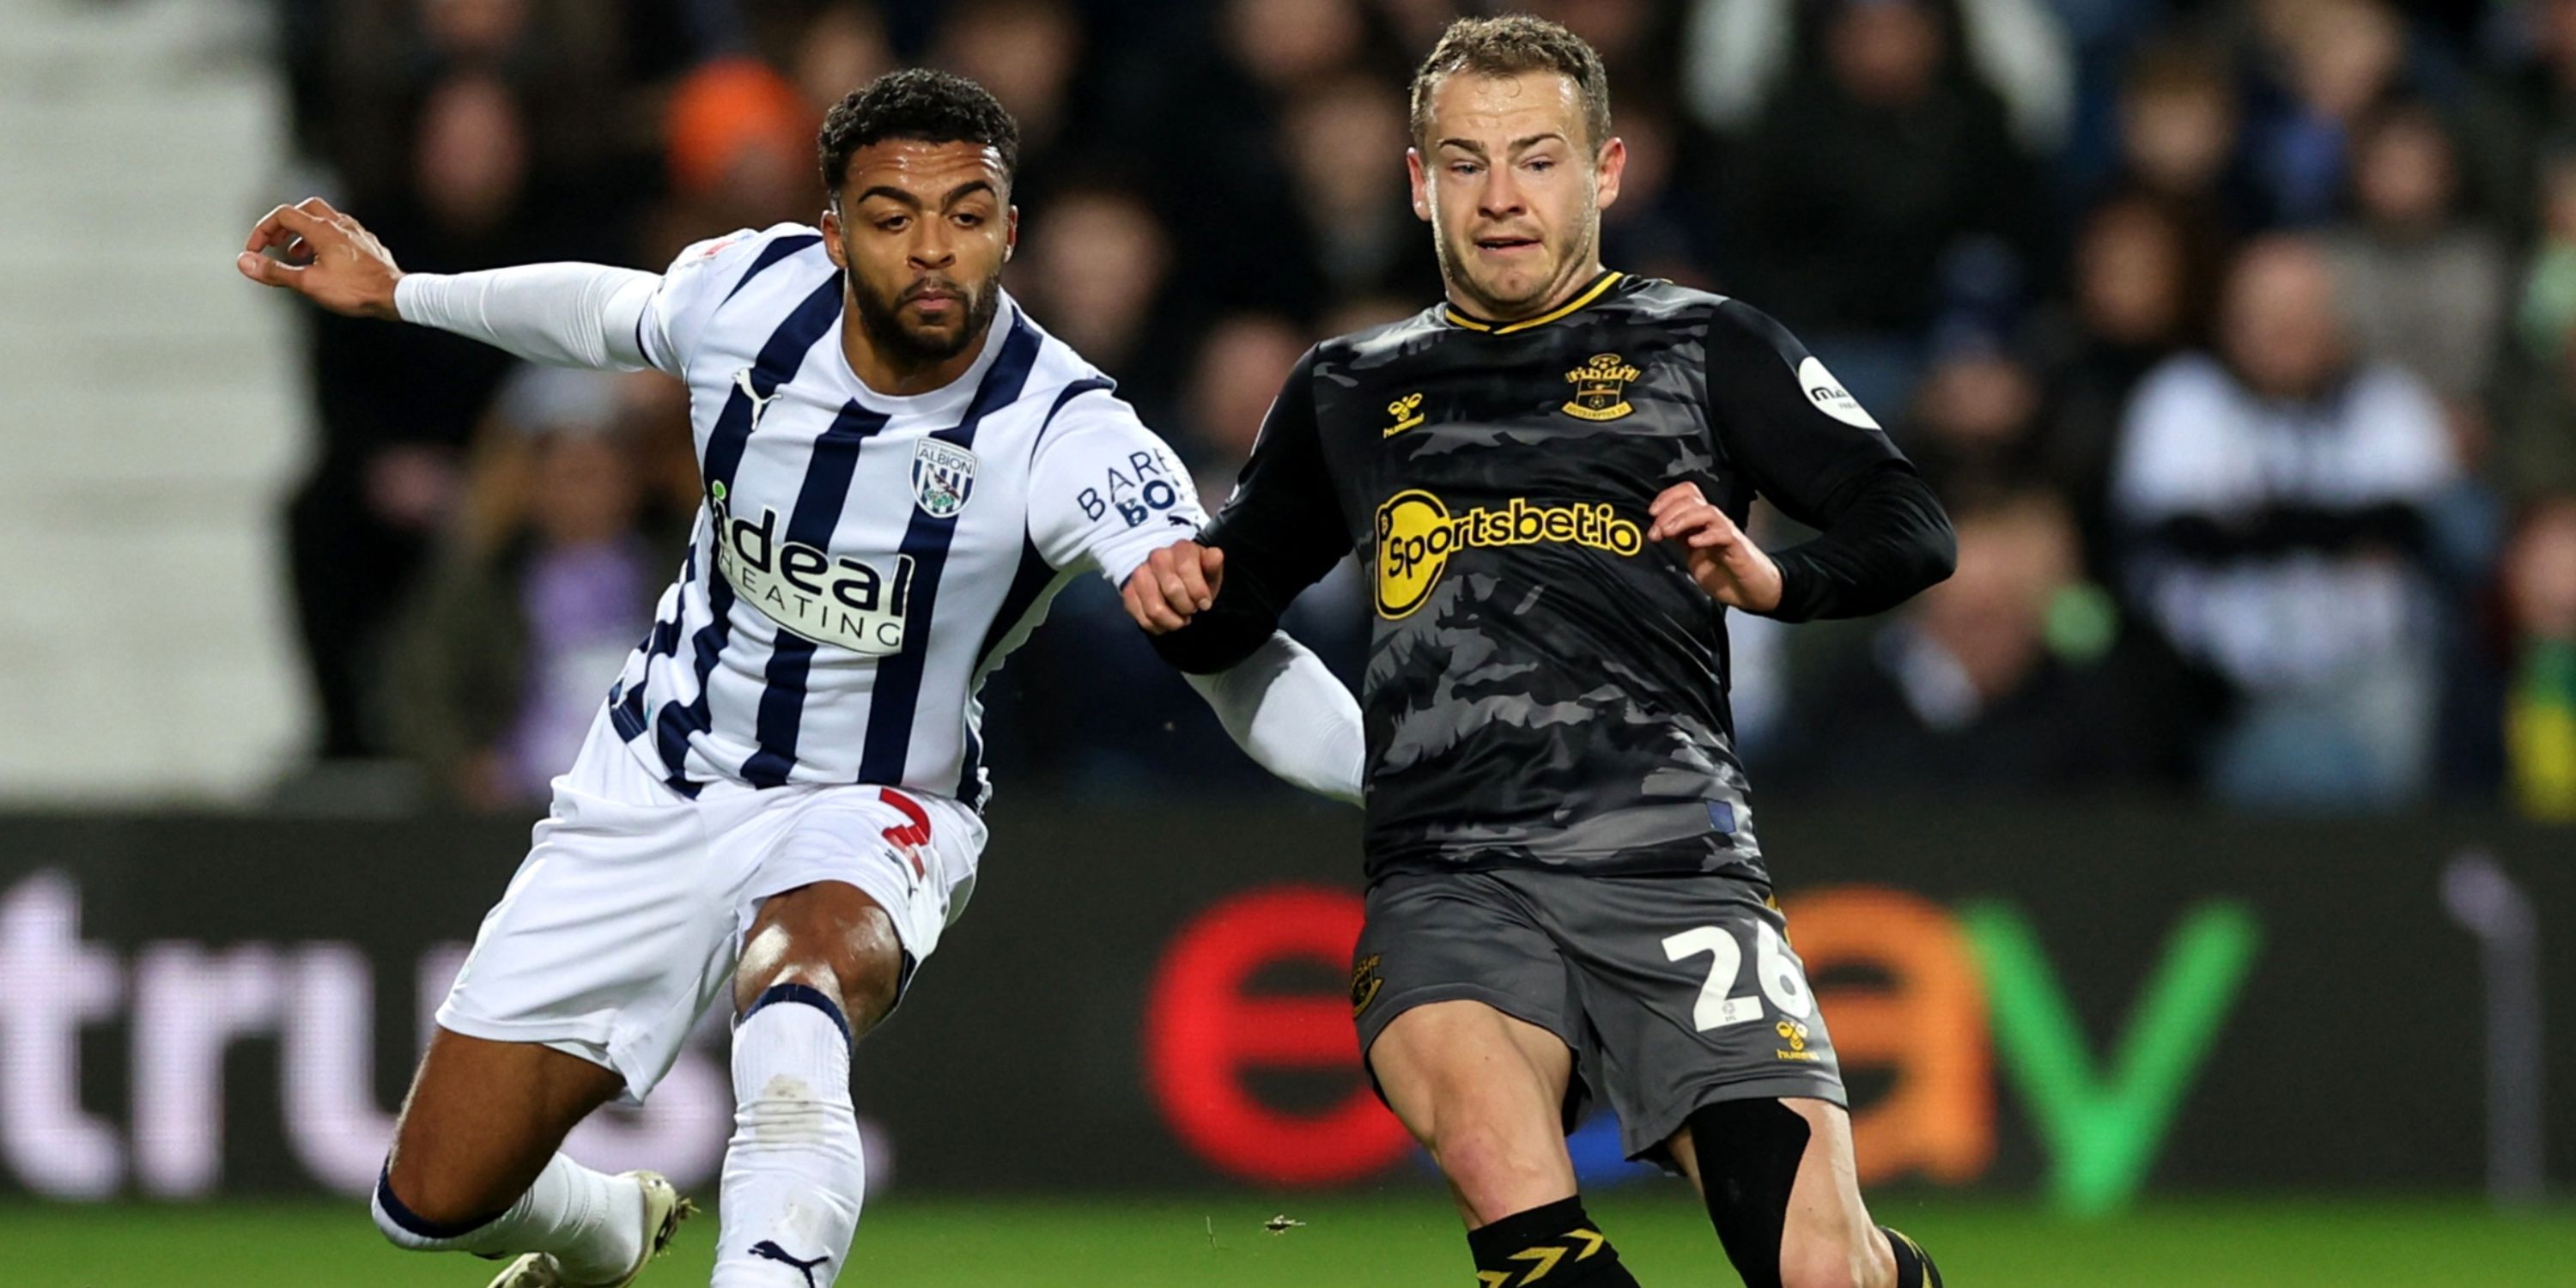 West Bromwich Albion right-back Darnell Furlong and Southampton winger Ryan Fraser battling for possession